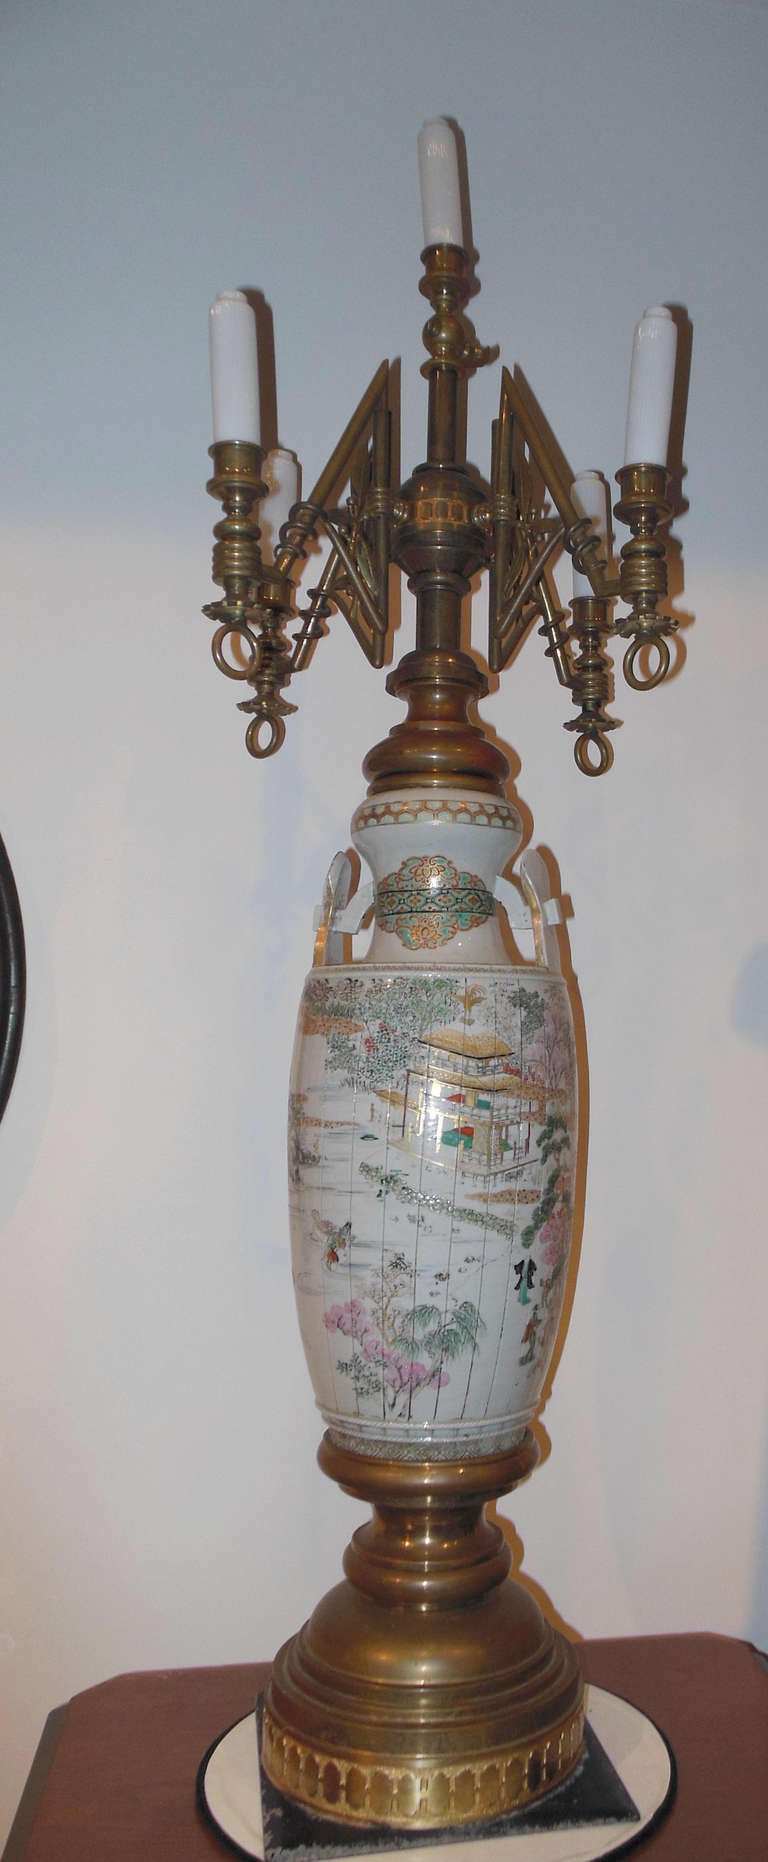 A large and rare Victorian Newel light in the aesthetic taste with a Satsuma porcelain central column, originally, made for gas and has not been converted to electricity. The lamp has five original glass candles. This lamp must have graced a